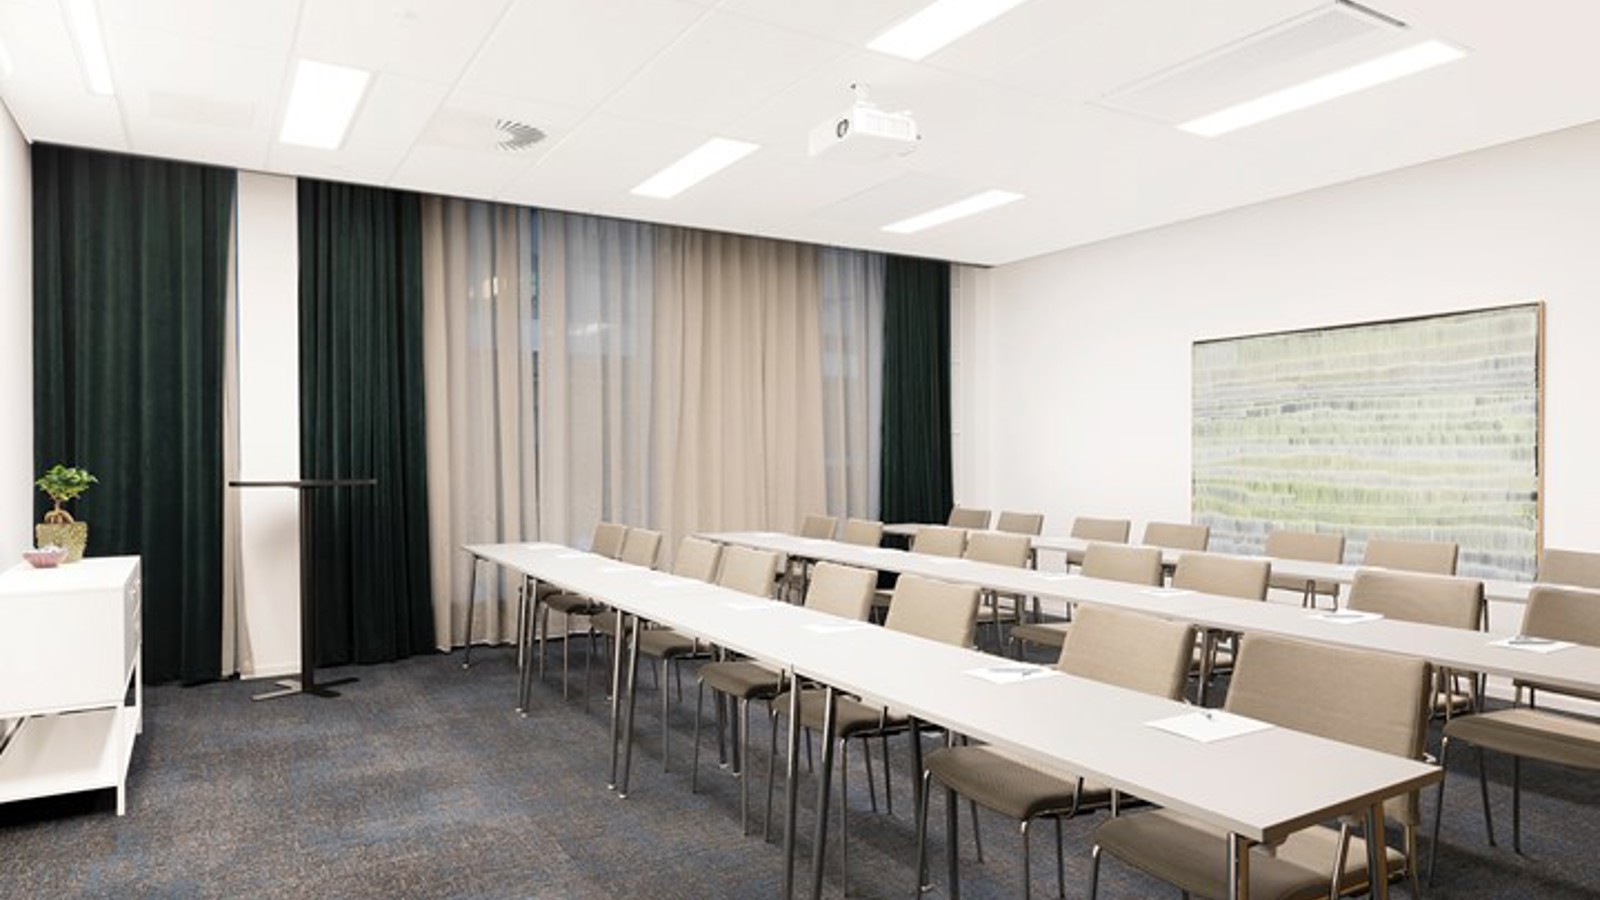 Conference room with school seating, white furniture, gray carpet and drawn curtains